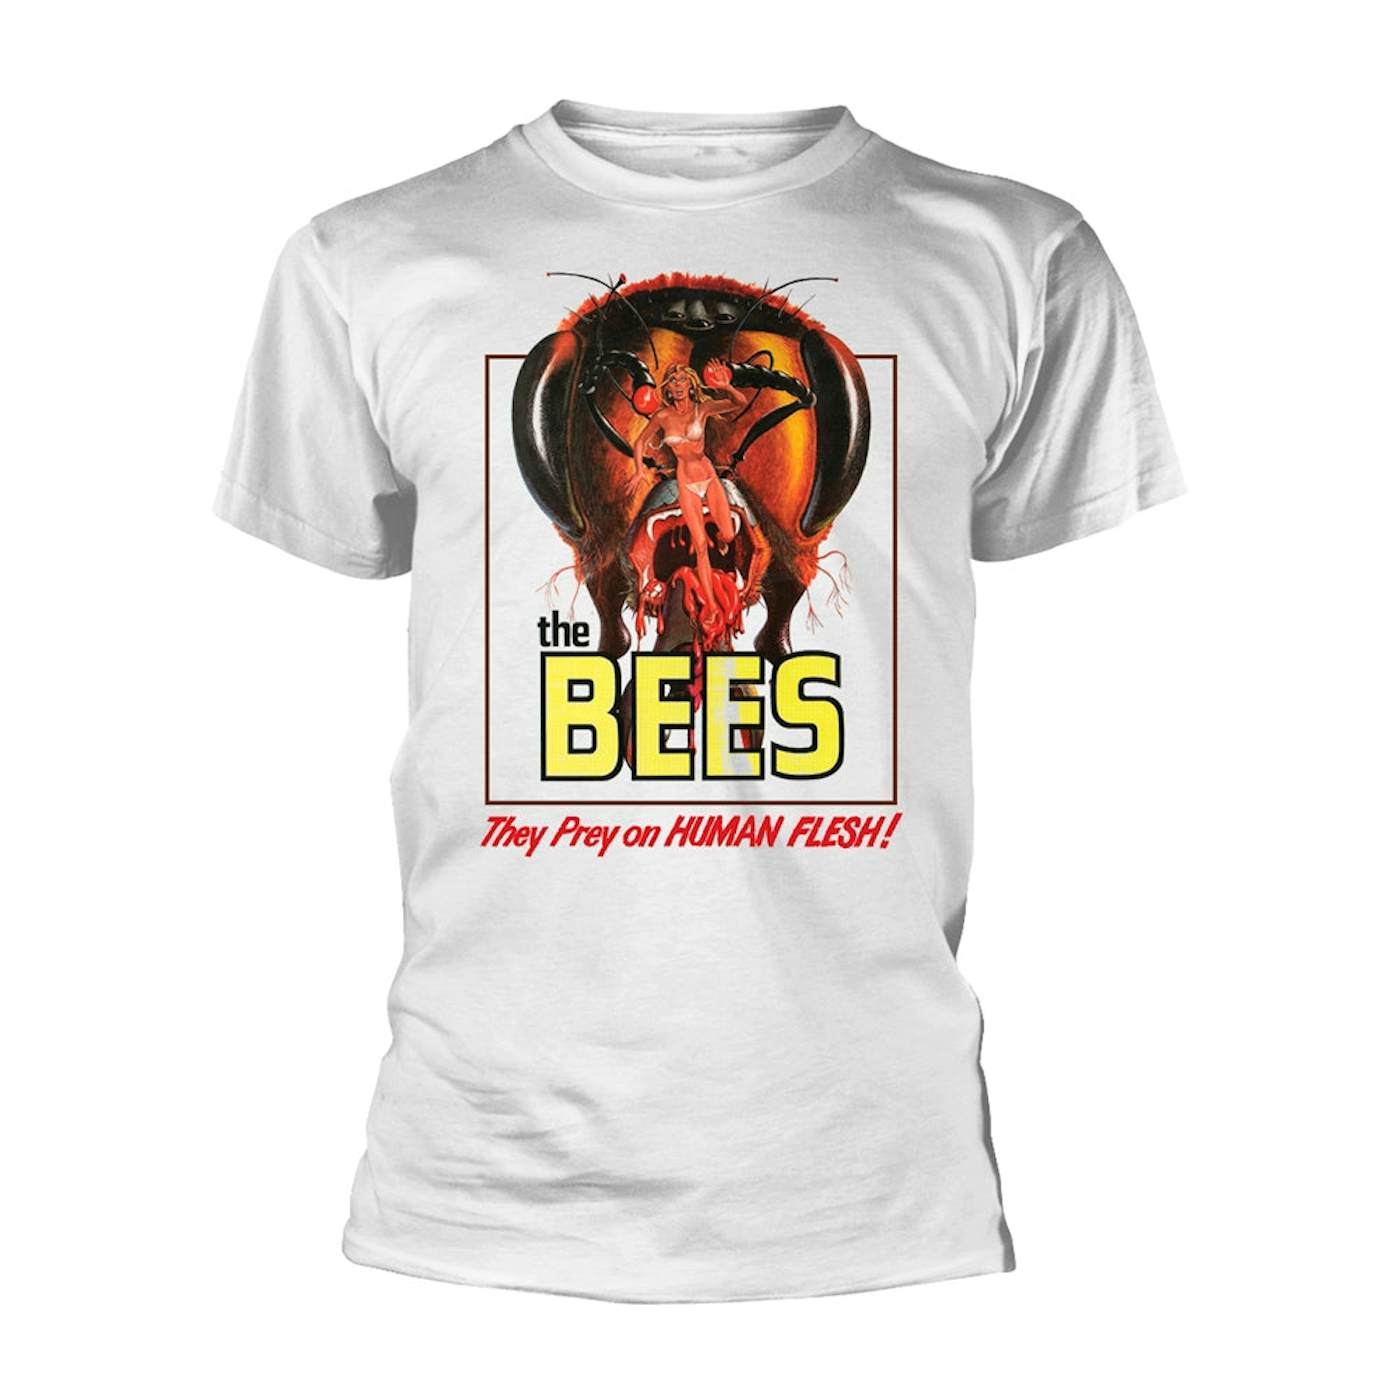 The Bees T Shirt - The Bees